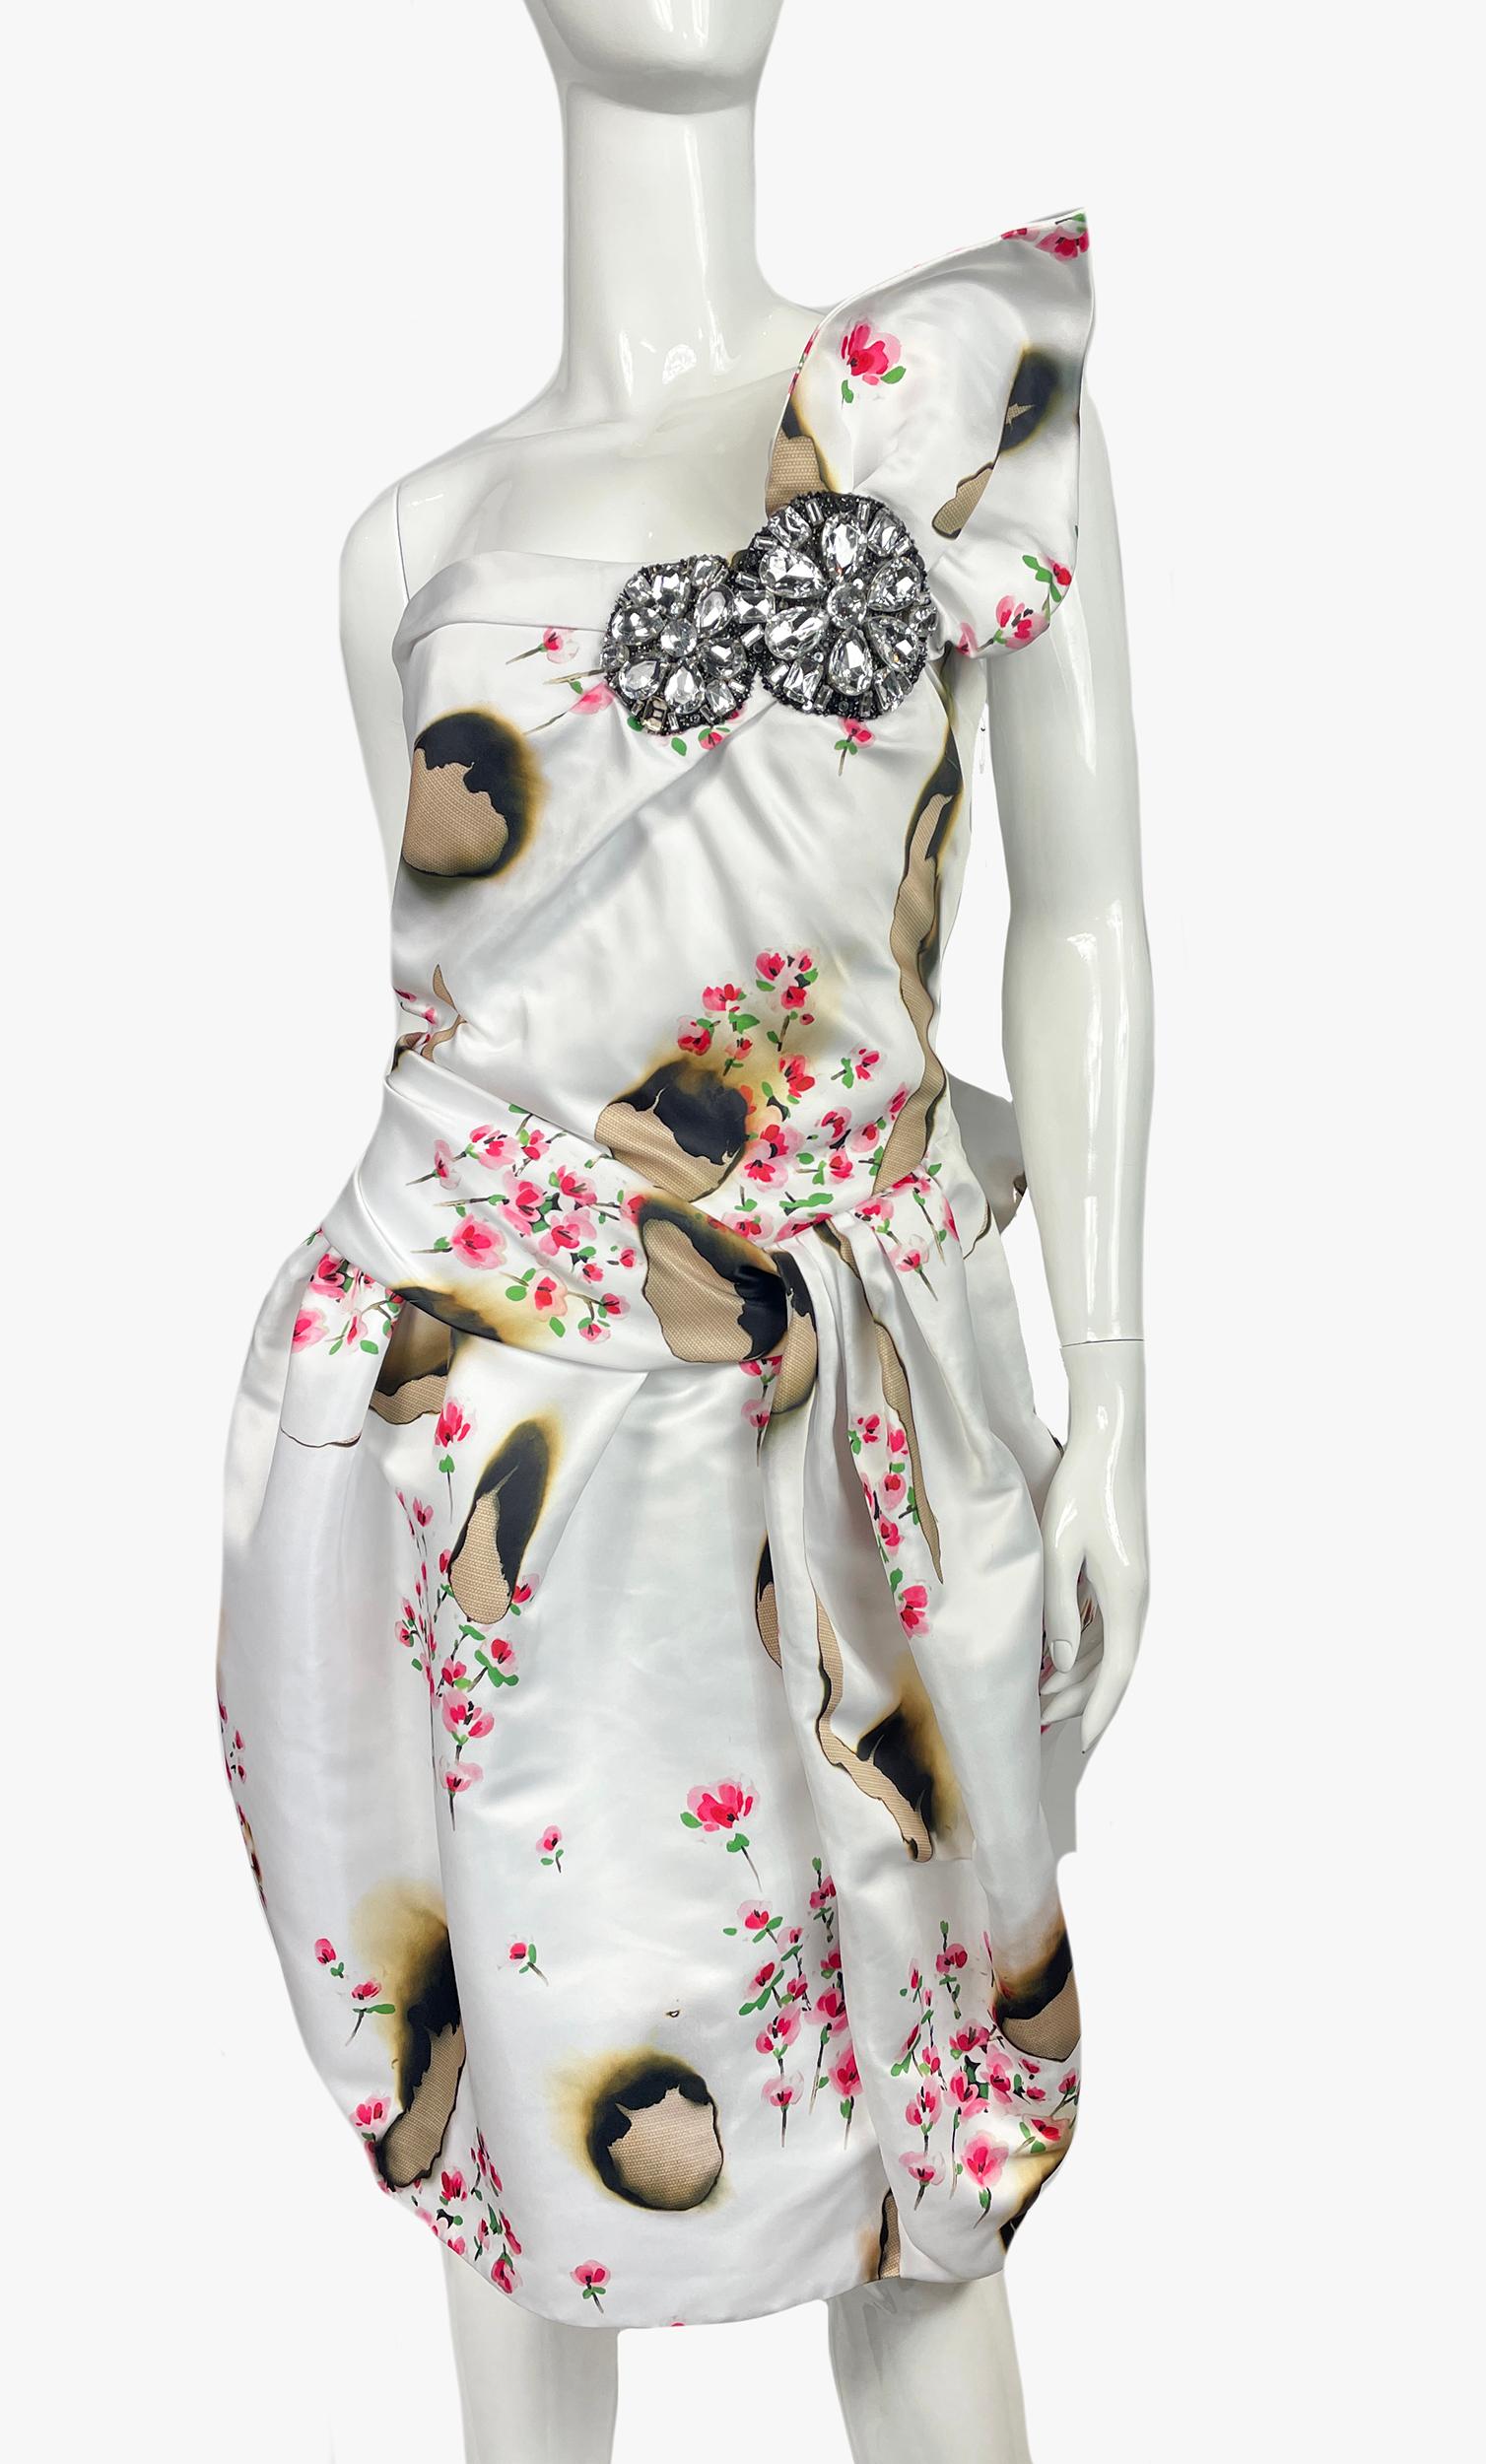 Stunning Moschino Couture floral print dress with beaded, sequin and crystal accents. Sleeveless with one-shoulder, concealed zip closure at side.
Period; 2000s
Fabric: 100% Polyester; Lining 60% Acetate, 40% Rayon; Combo 82% Nylon, 18%